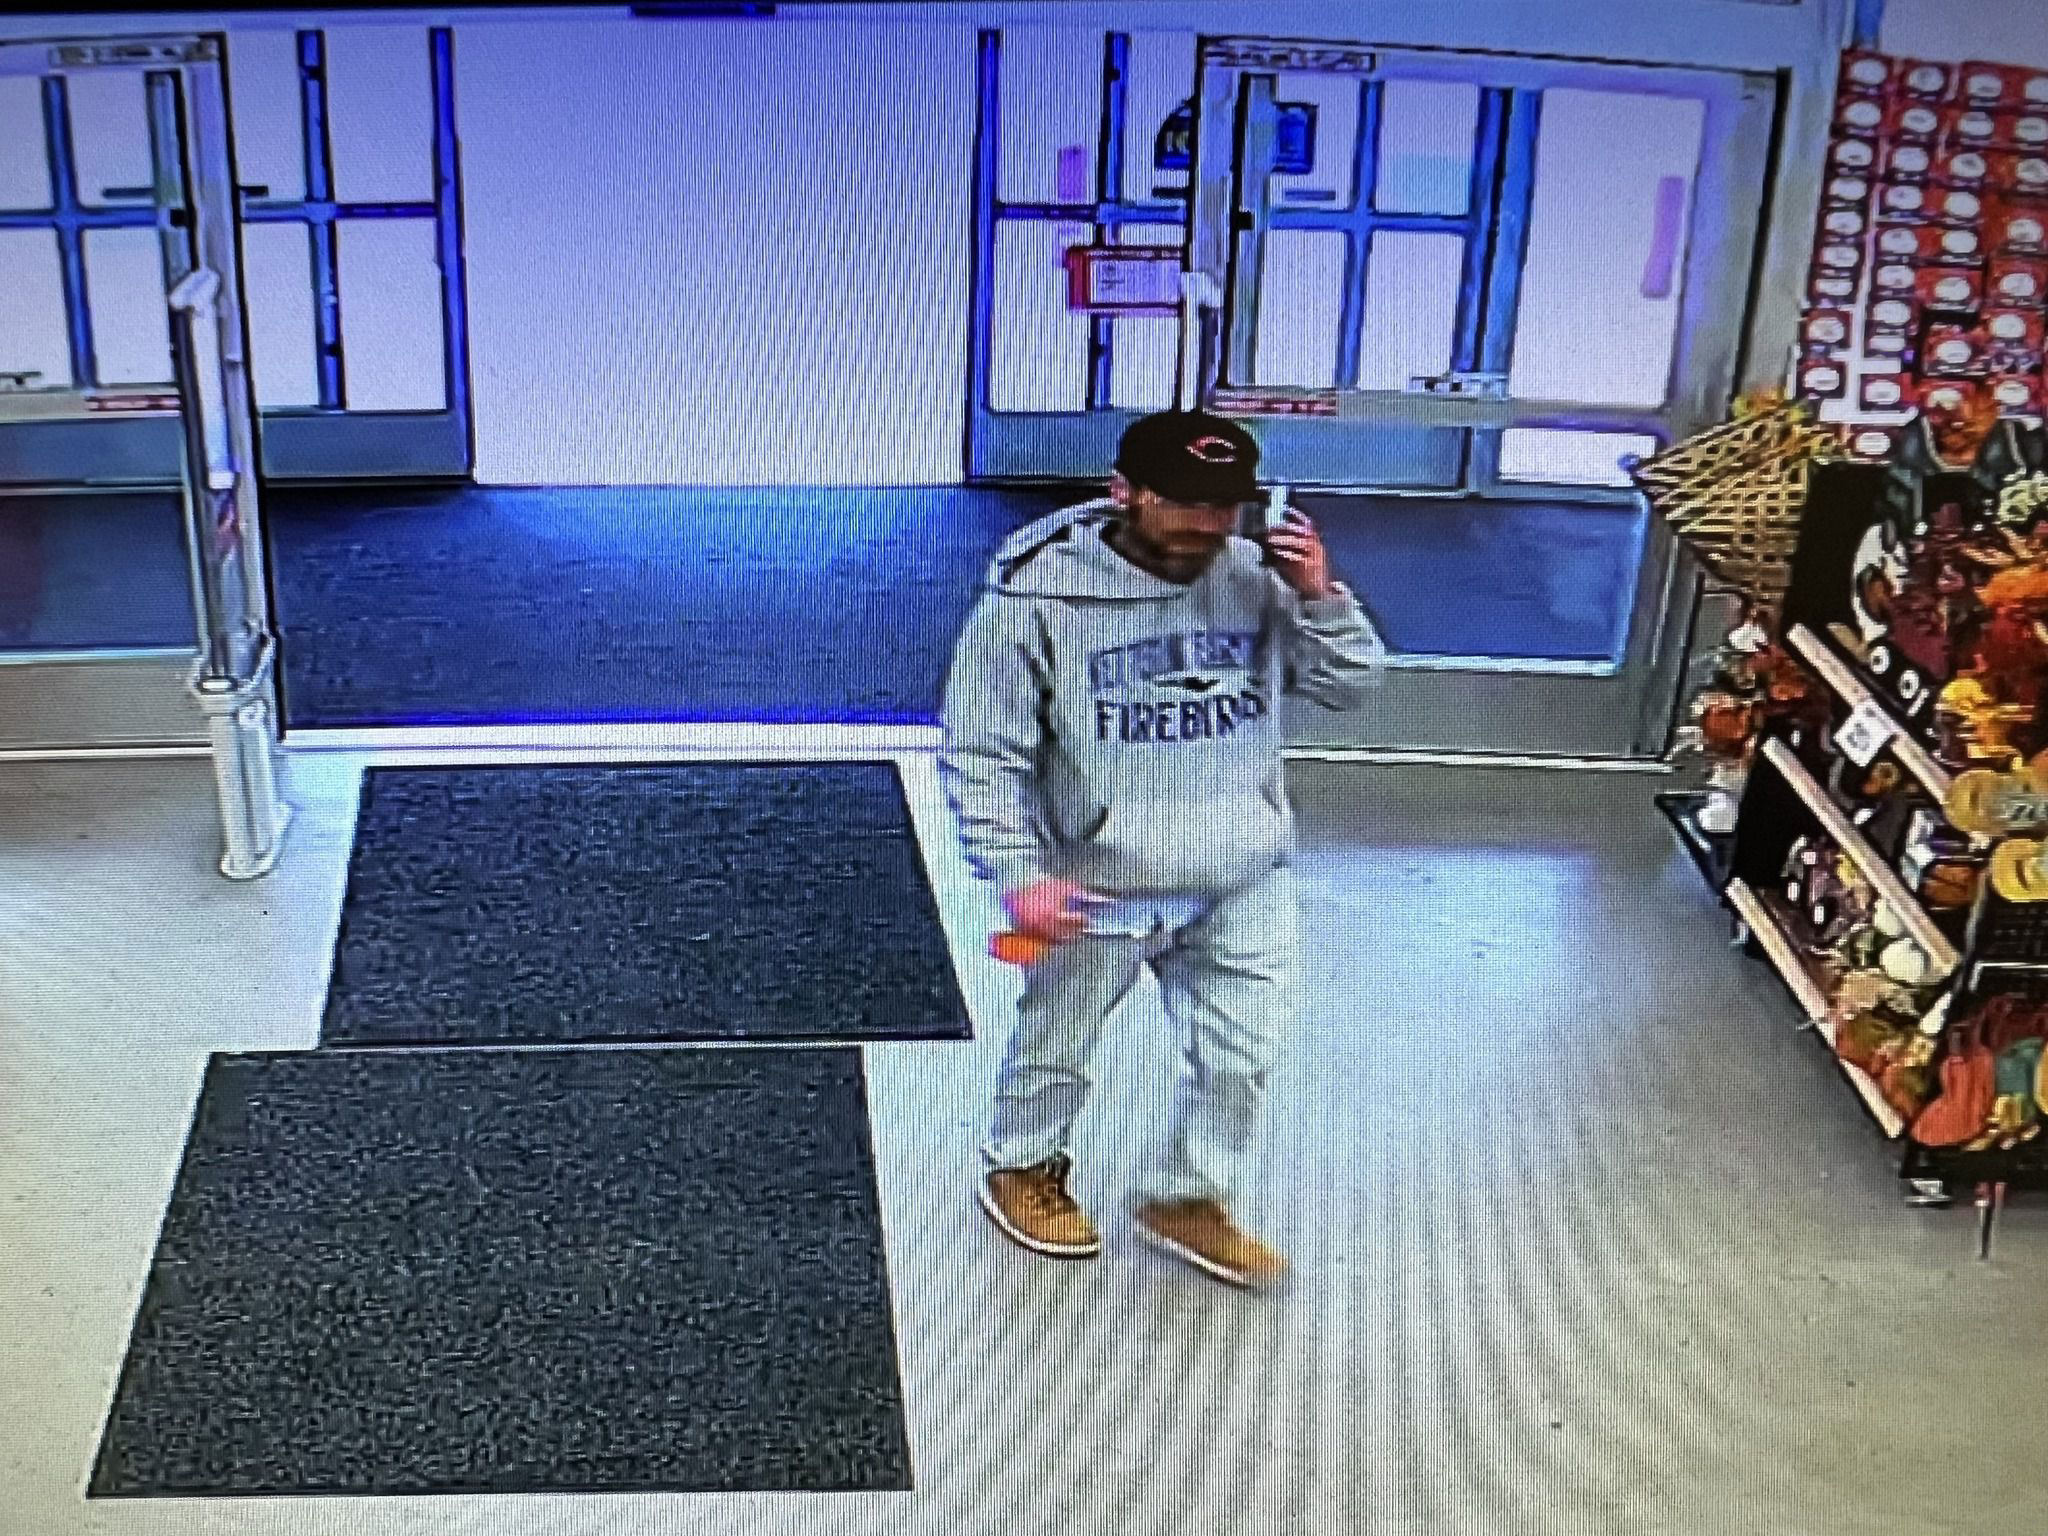 Police Asking For Public’s Help In Identifying Theft Suspect At Local Store